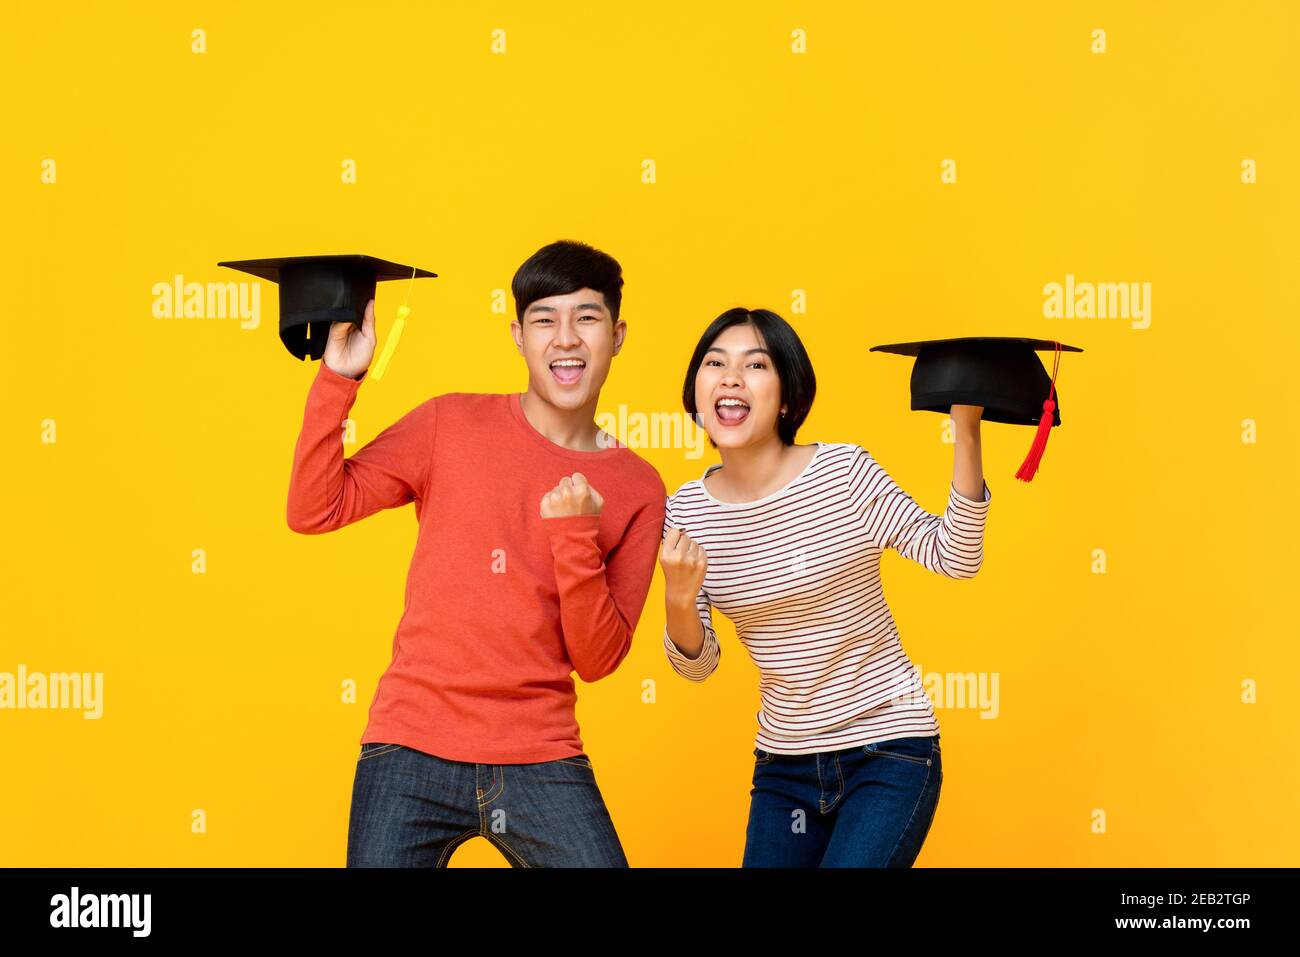 Excited happy Asian college students holding graduate caps in colorful yellow studio background Stock Photo